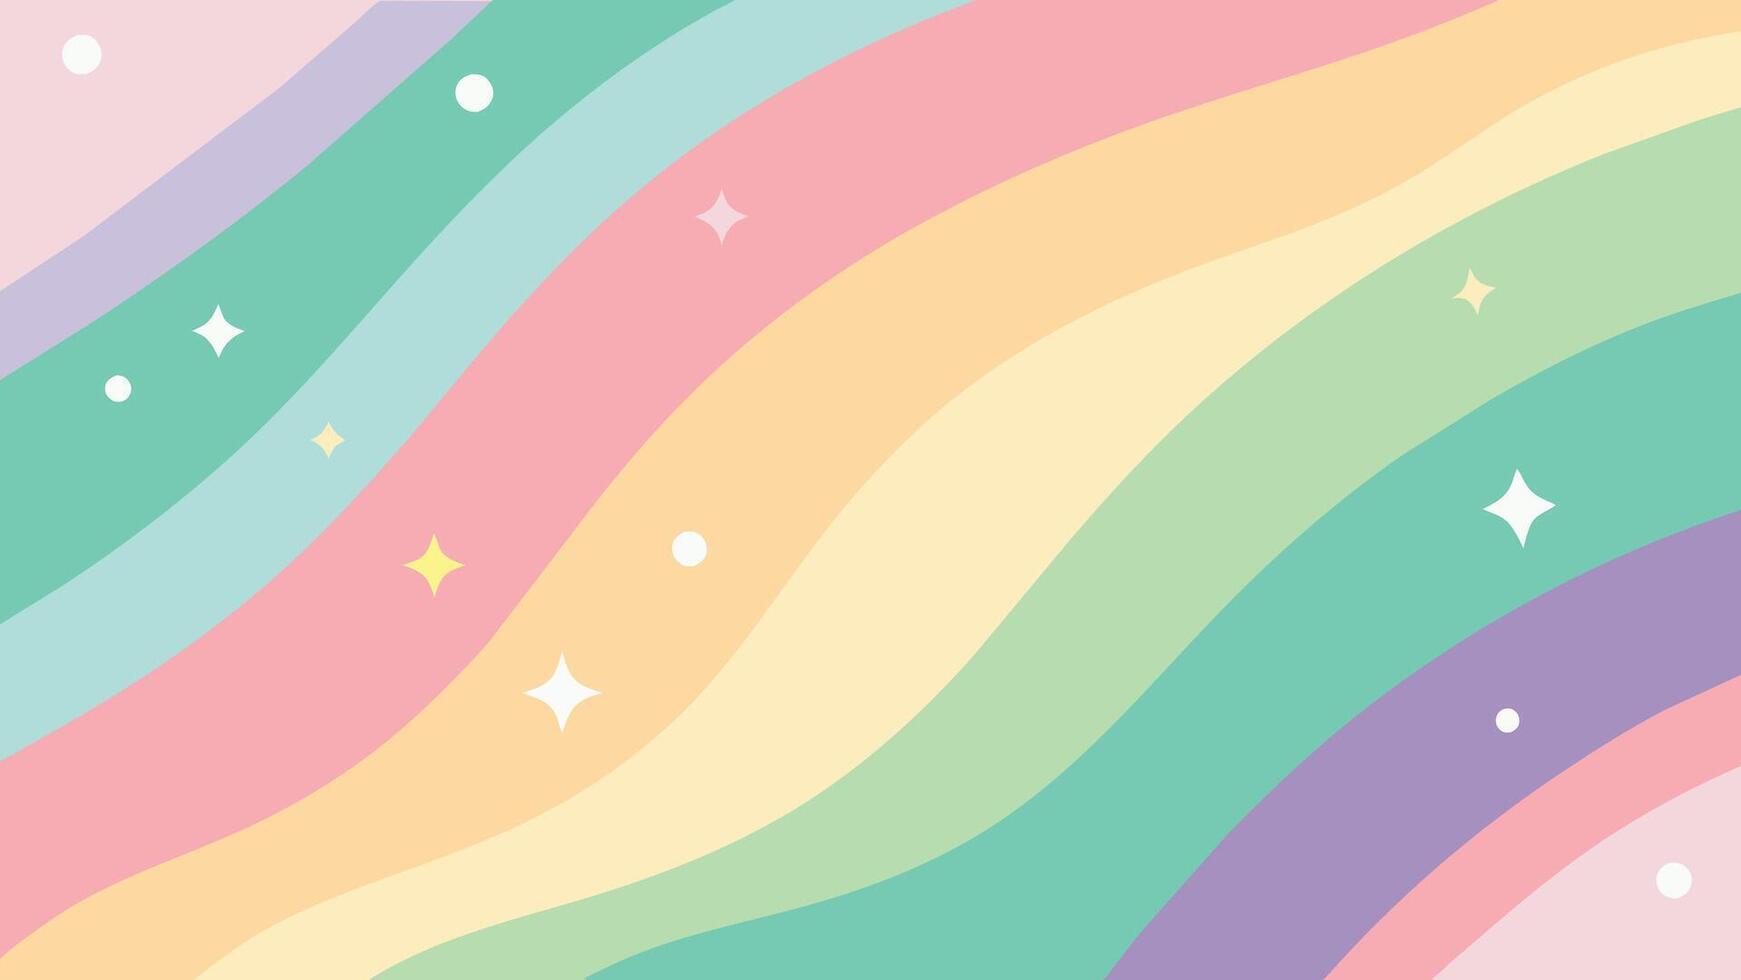 Abstract background with pastel colored stripes and stars. Vector illustration.